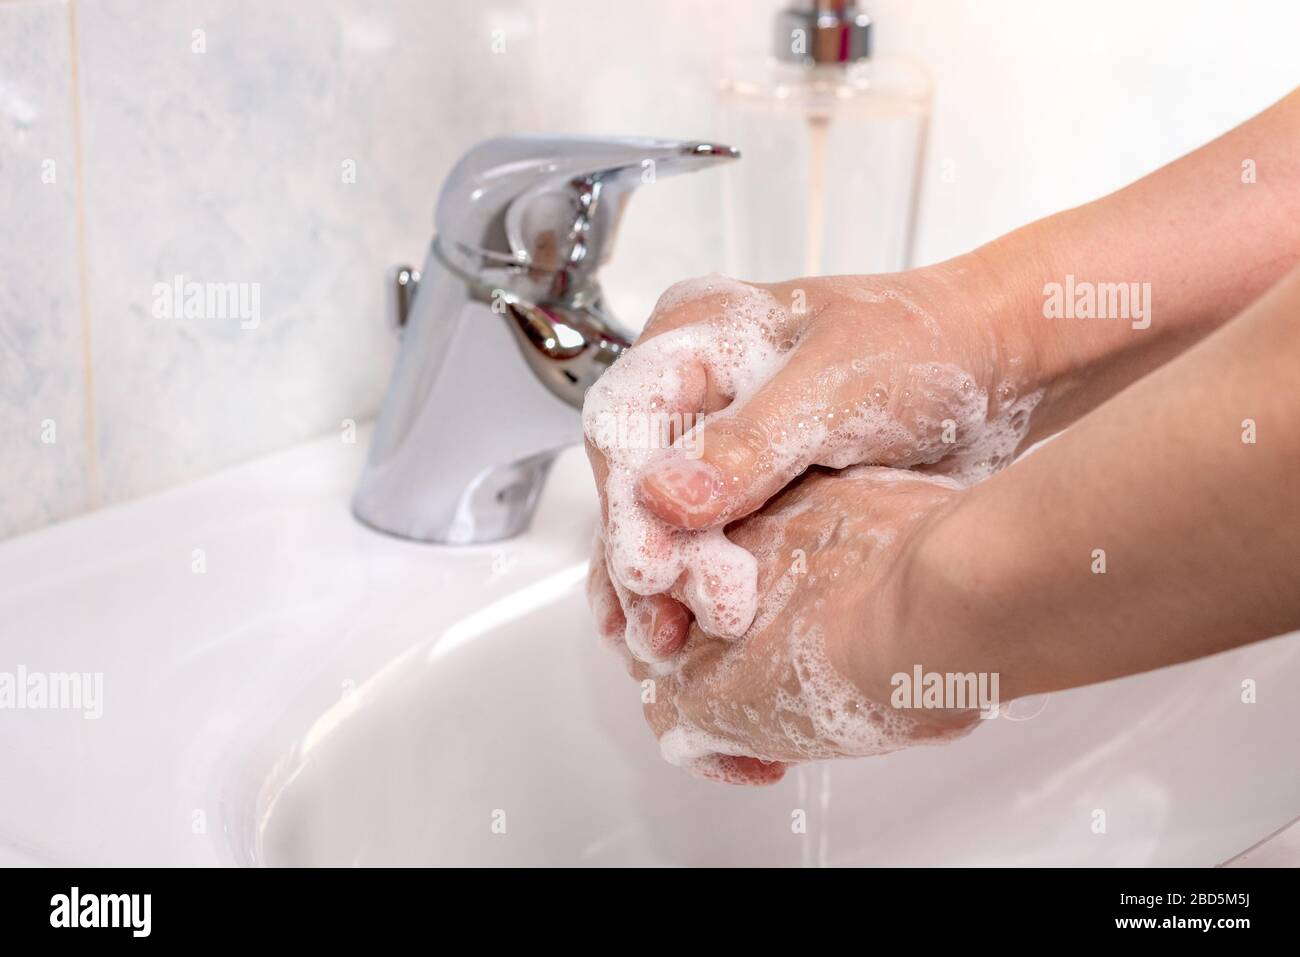 Woman using soap and hot water to wash her hands over a washbasin in a bathroom. Coronavirus pandemic prevention. Stock Photo